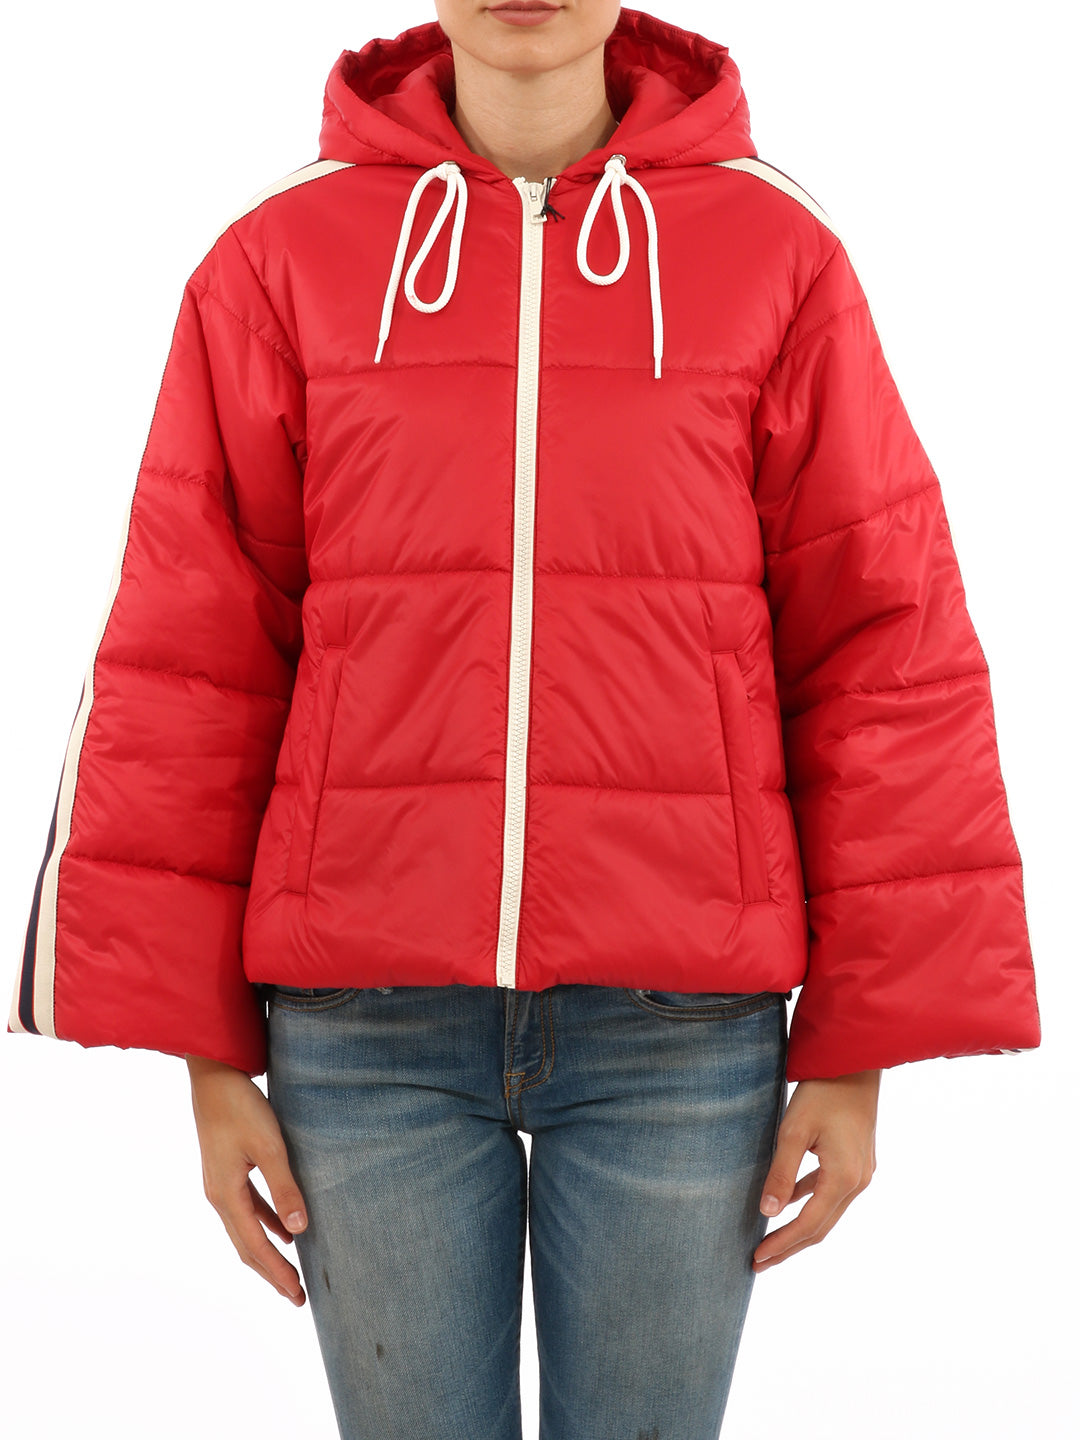 GUCCI GUCCI HOODED PUFFER JACKET